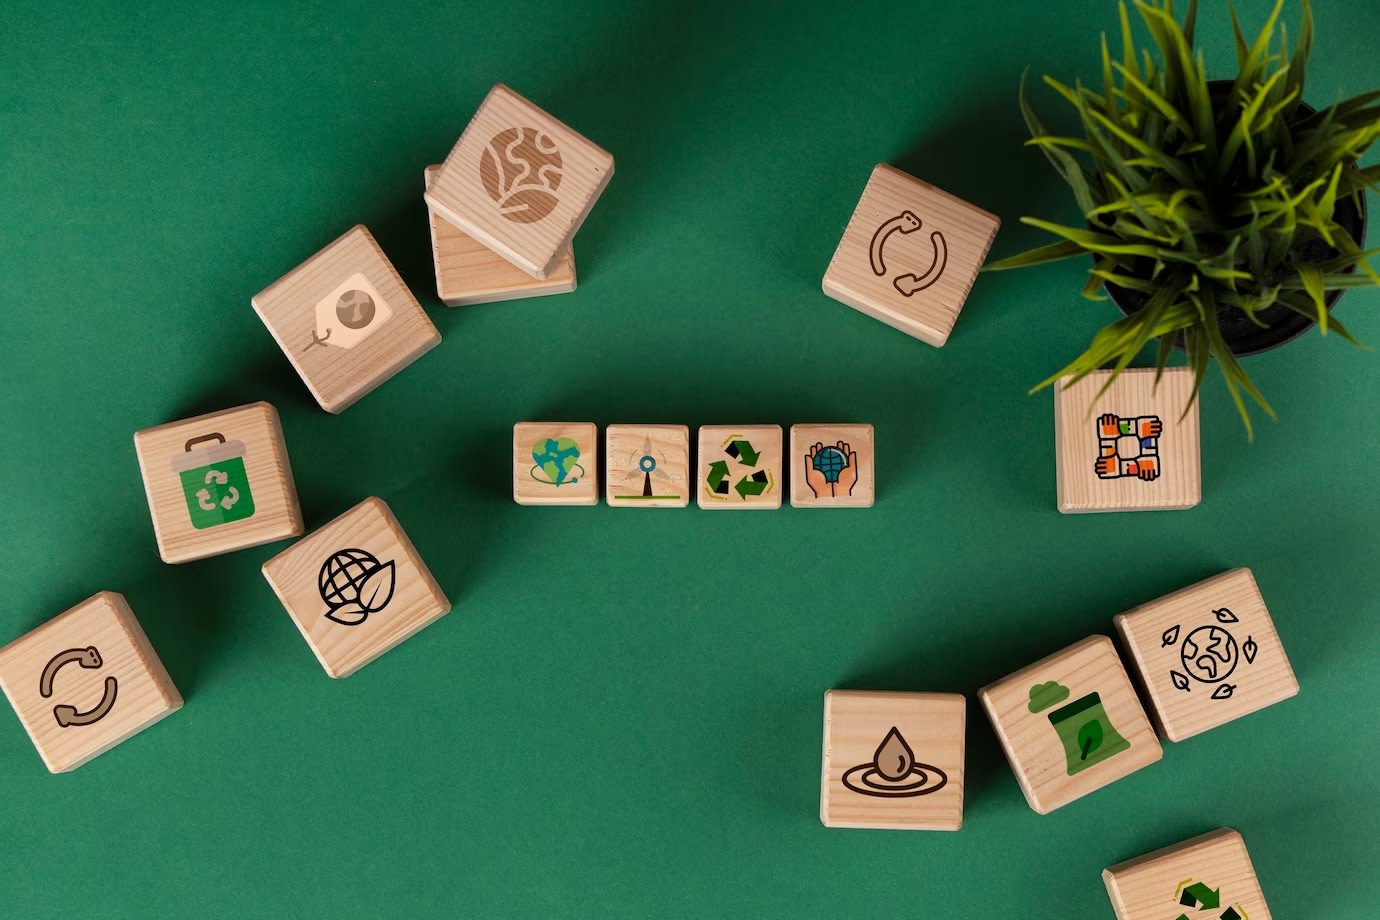 Image of SDGs wooden blocks on green background with plant